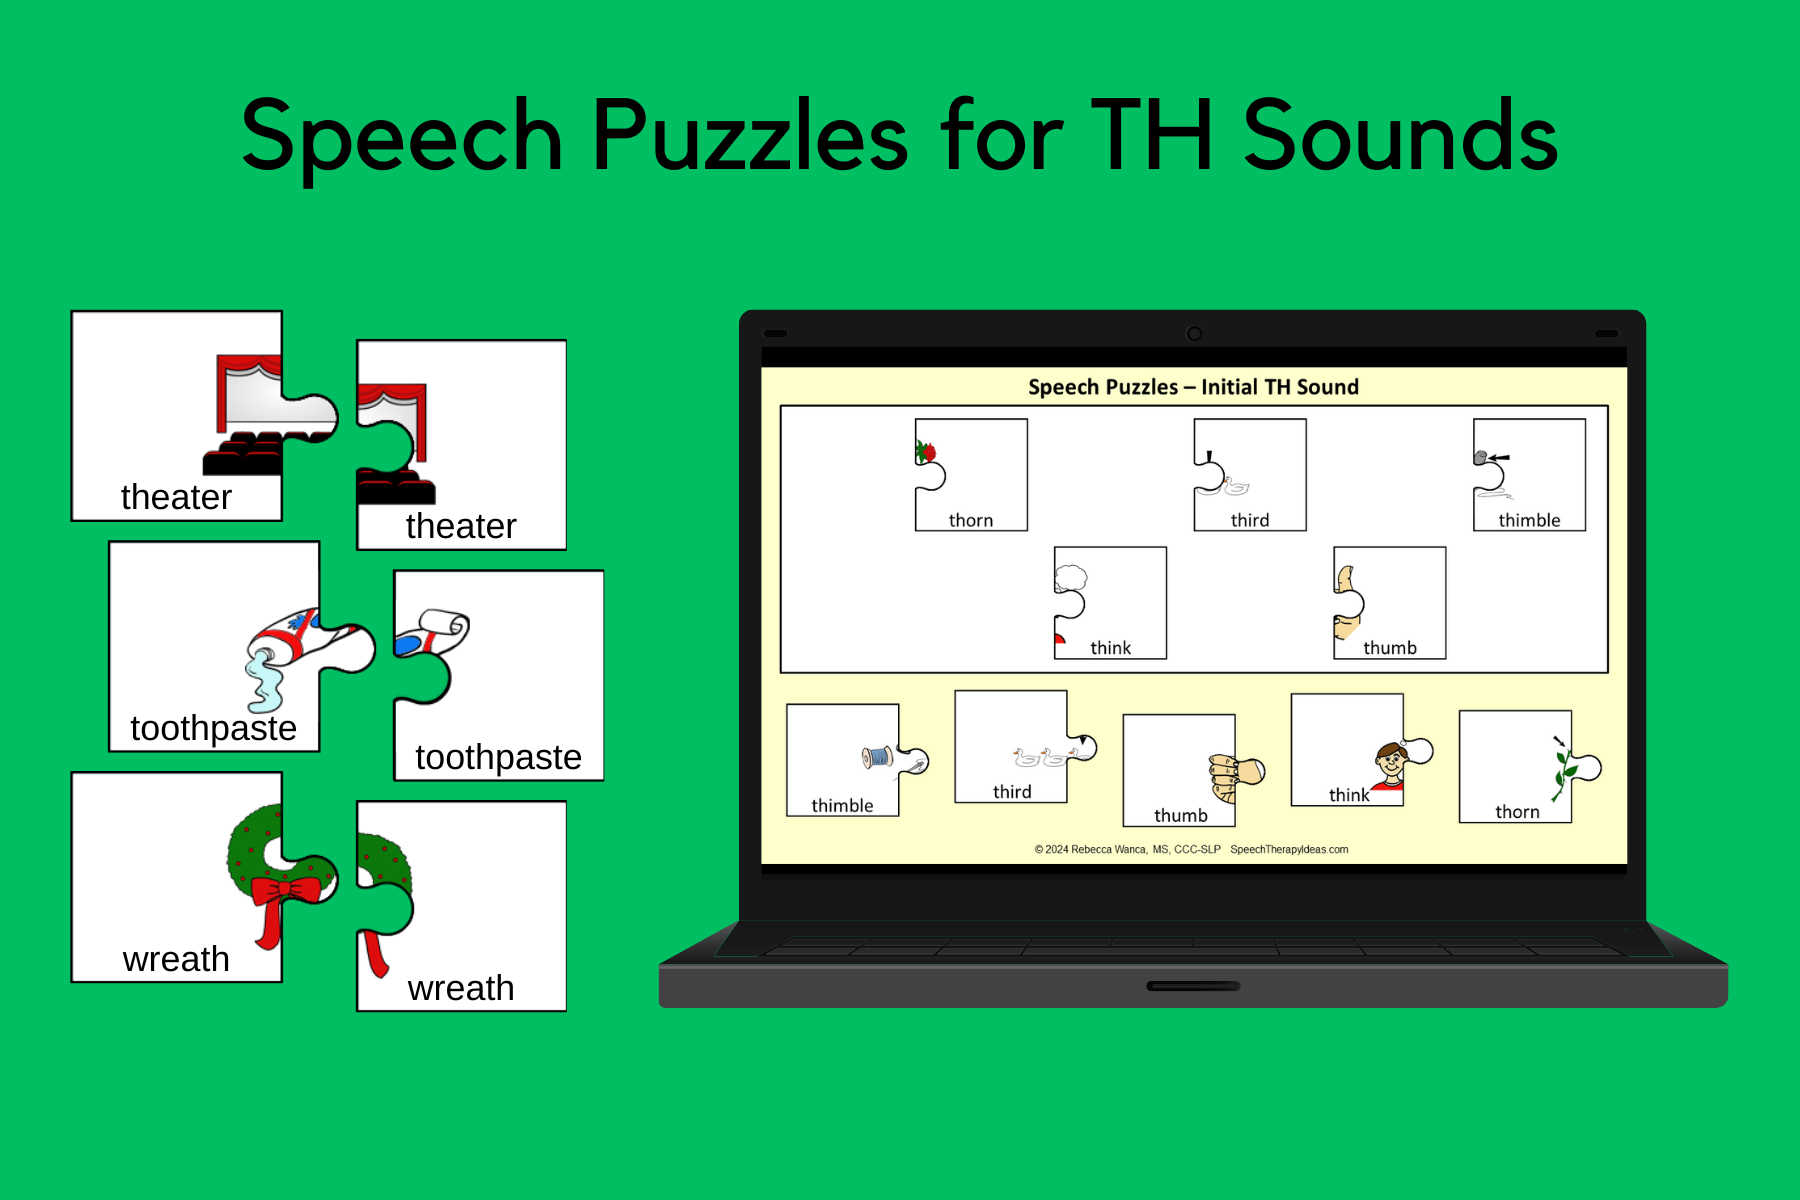 Speech Puzzles for TH Sounds